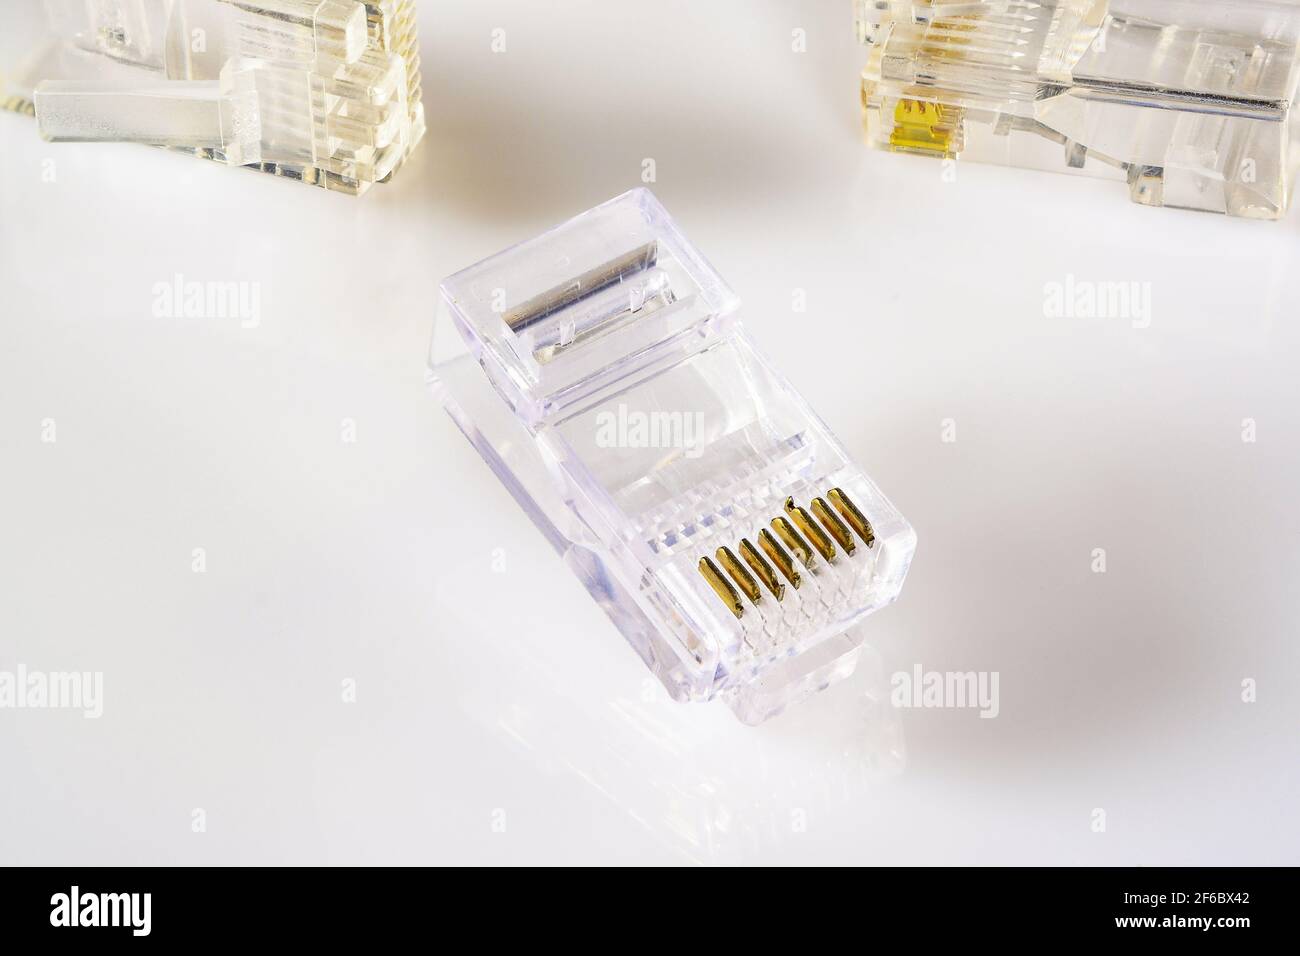 Connector rj-45. Transparent connector rj45 for network and internet. Close up macro on gloss white background with shadow. Stock Photo